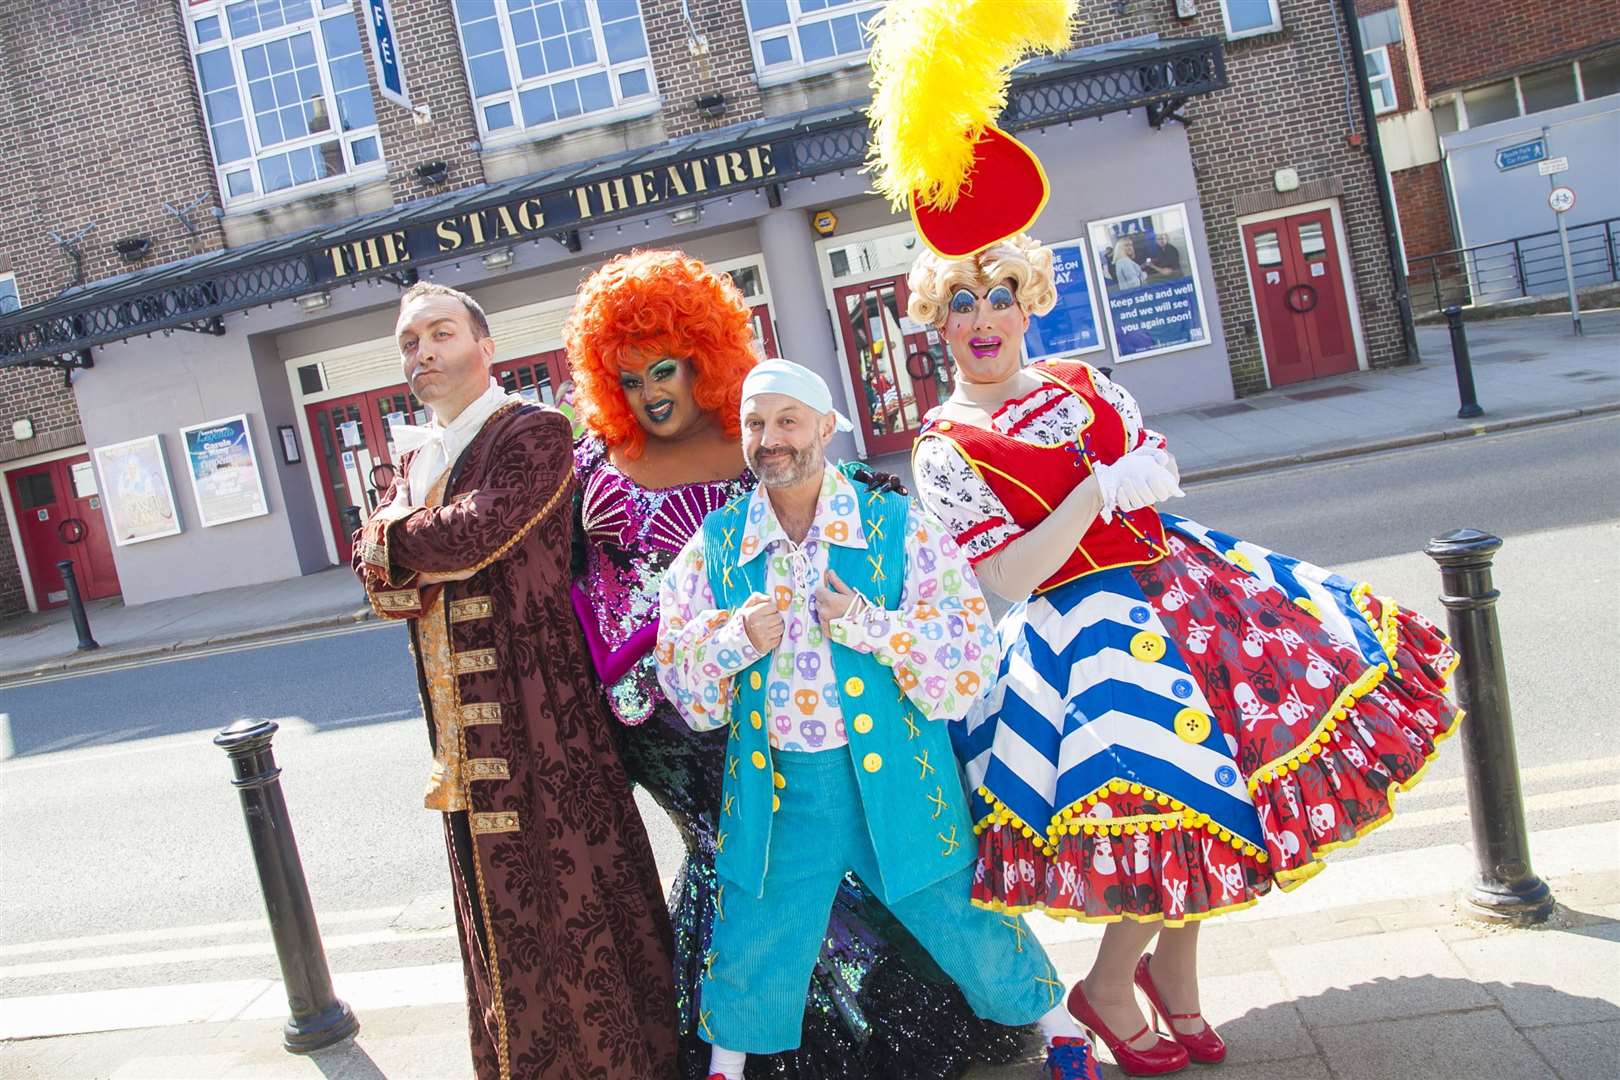 Ru Paul's Drag Race star Vinegar Strokes and Silly Billy are part of the panto cast